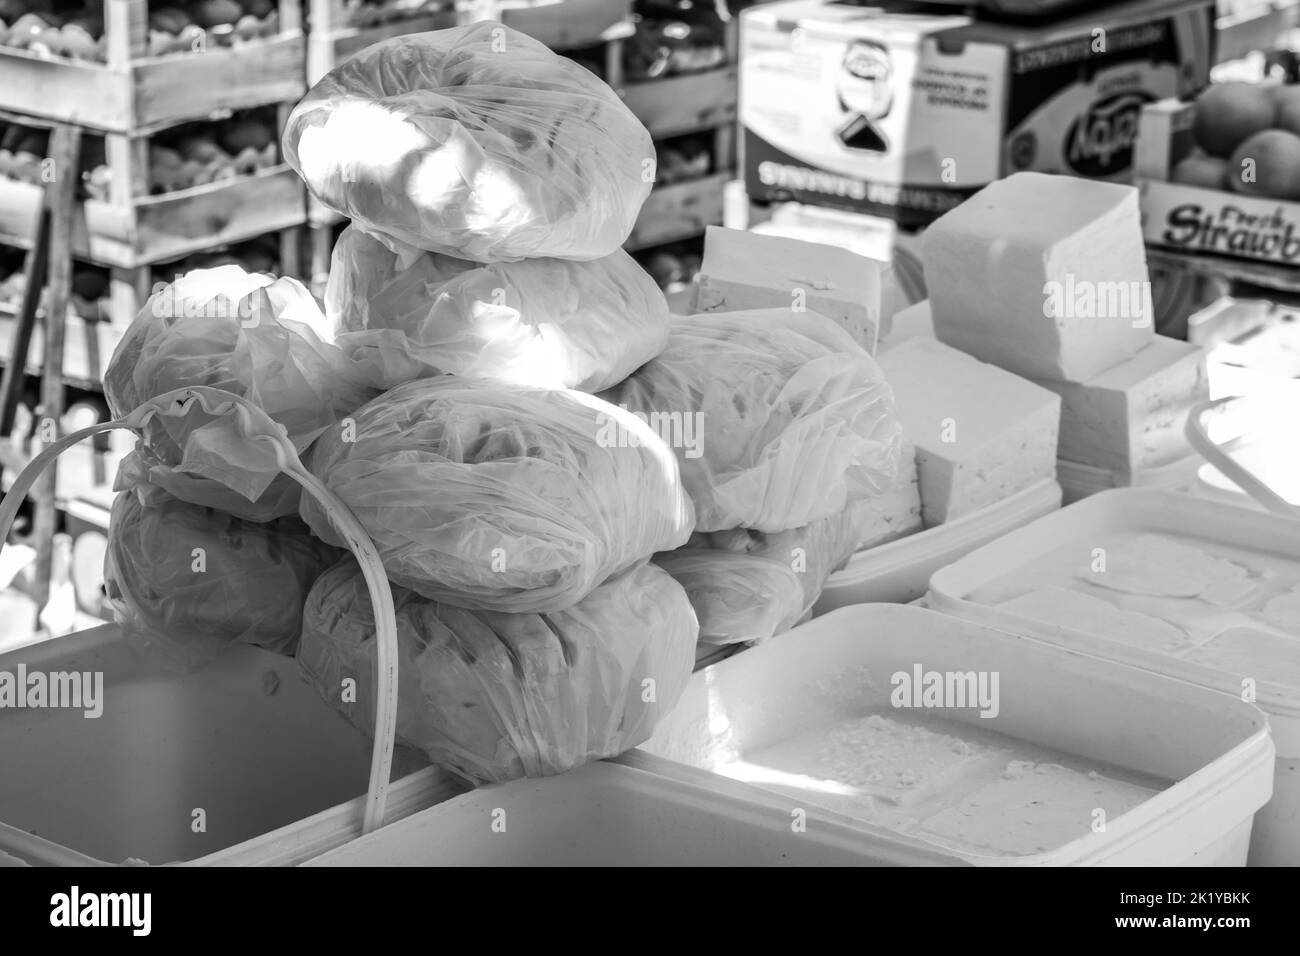 Cheese and dairy products for sale at a stall in the open market of Tetovo town in North Macedonia. Fresh items for sale in containers and boxes. Stock Photo